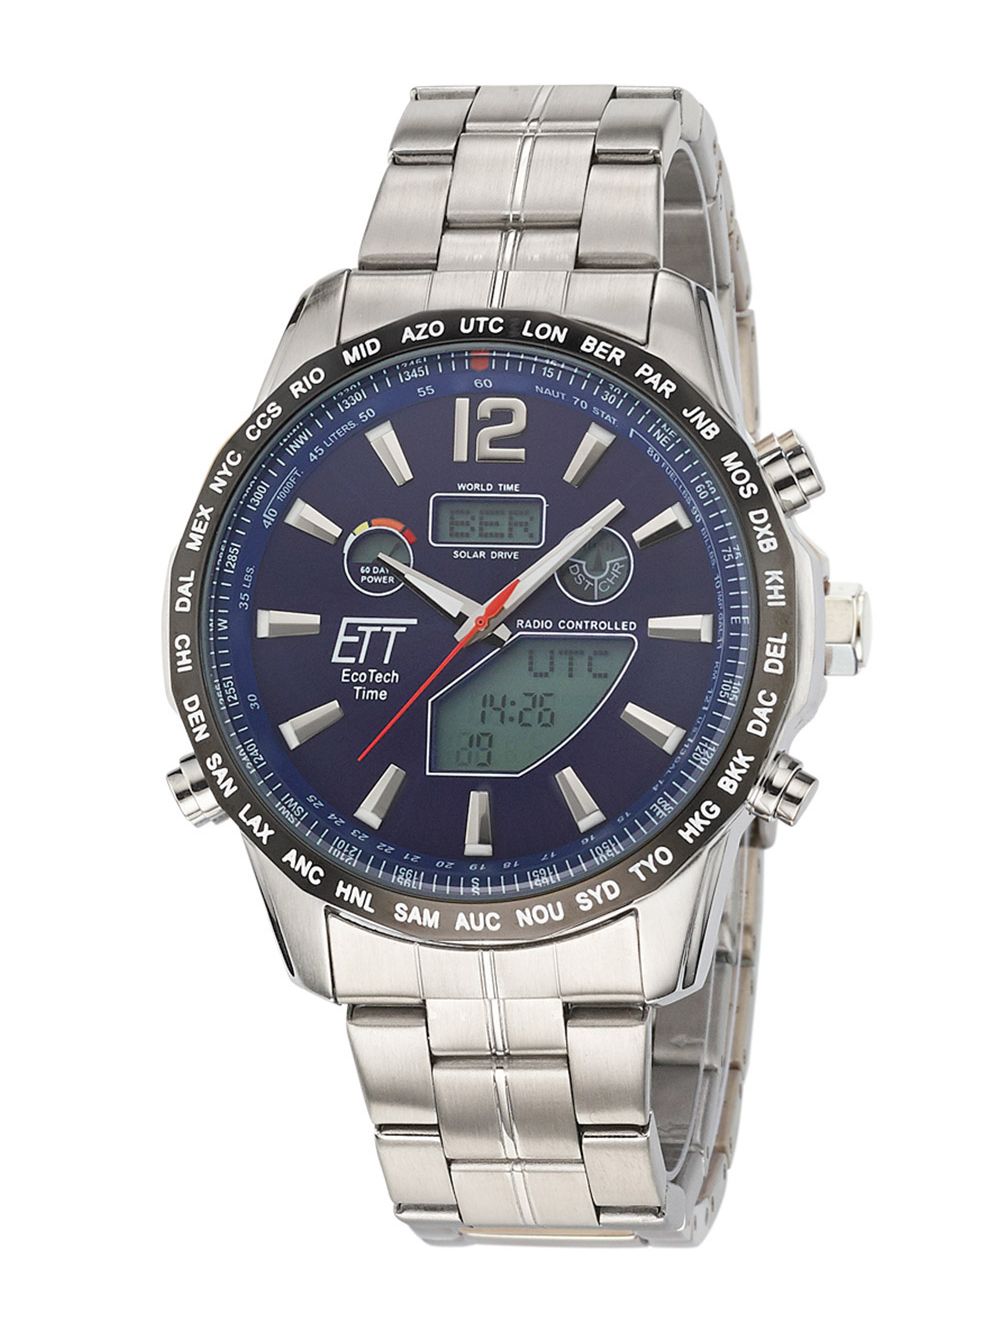 ETT Eco Tech Time Radio-Controlled Solar Men's Watch Discovery Steel/Blue  EGS-11478-31M • uhrcenter